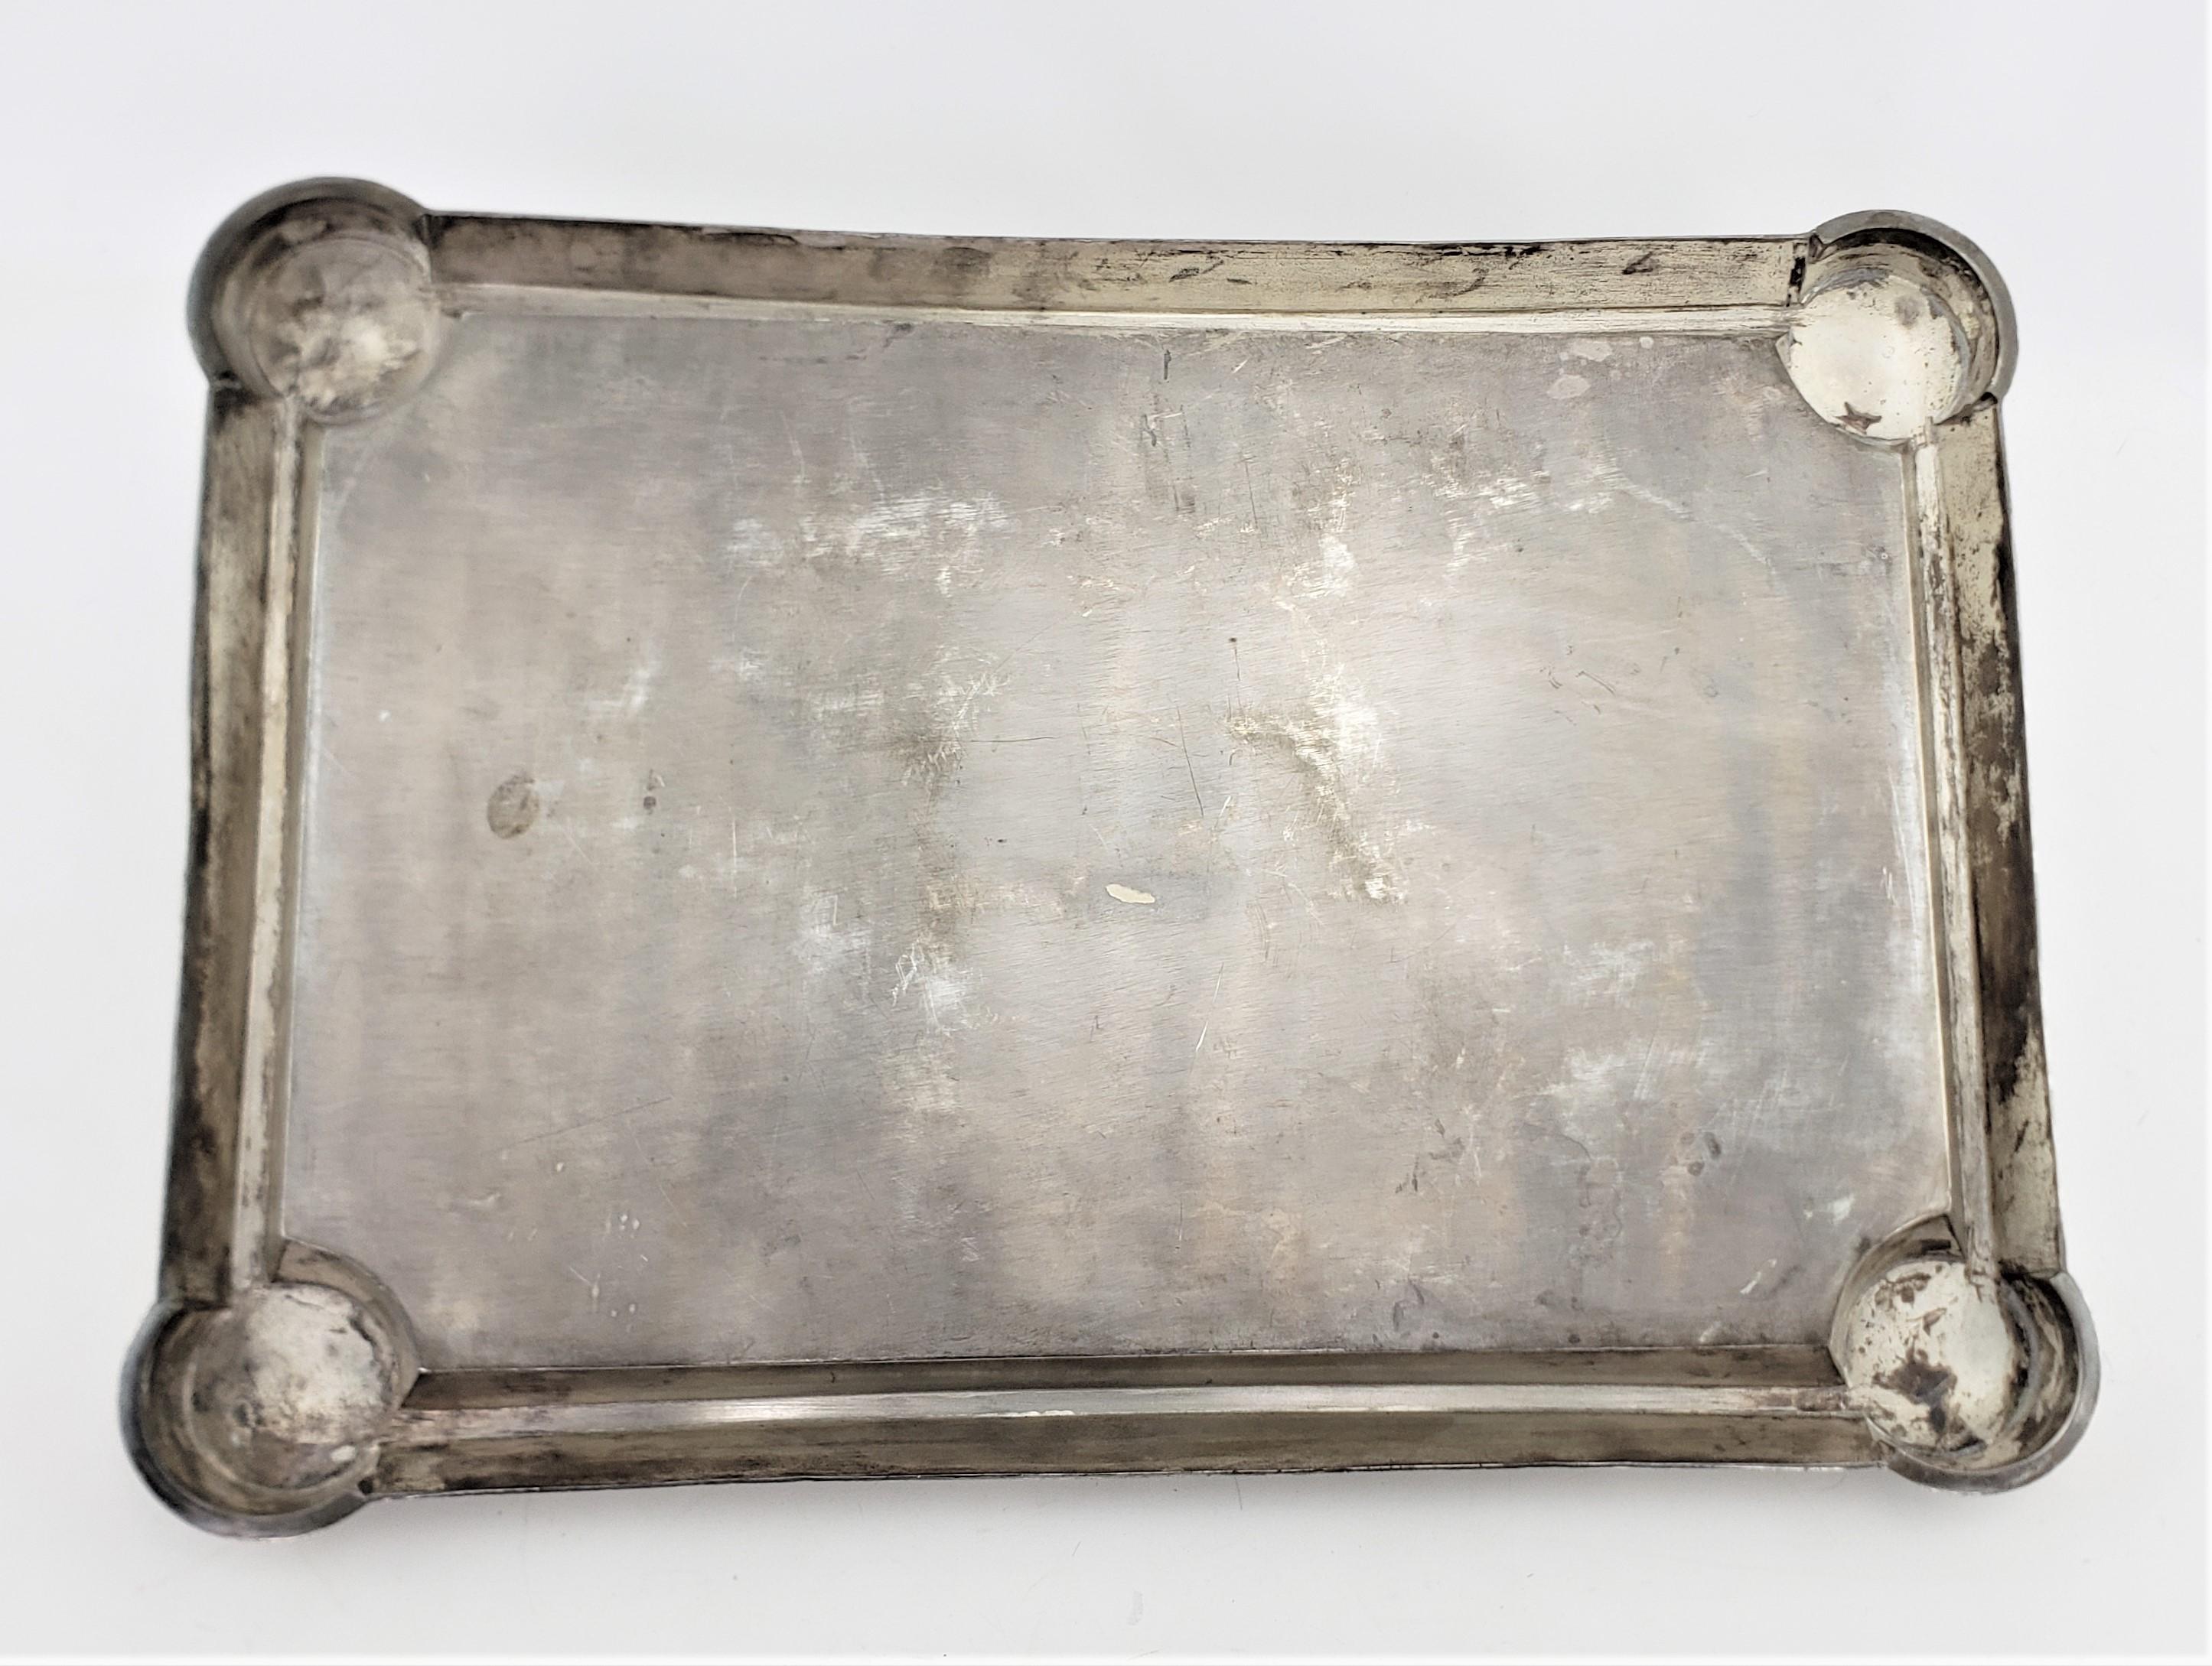 Antique Aesthetic Movement Silver Plated Serving Tray with Figural Siren Handles For Sale 8